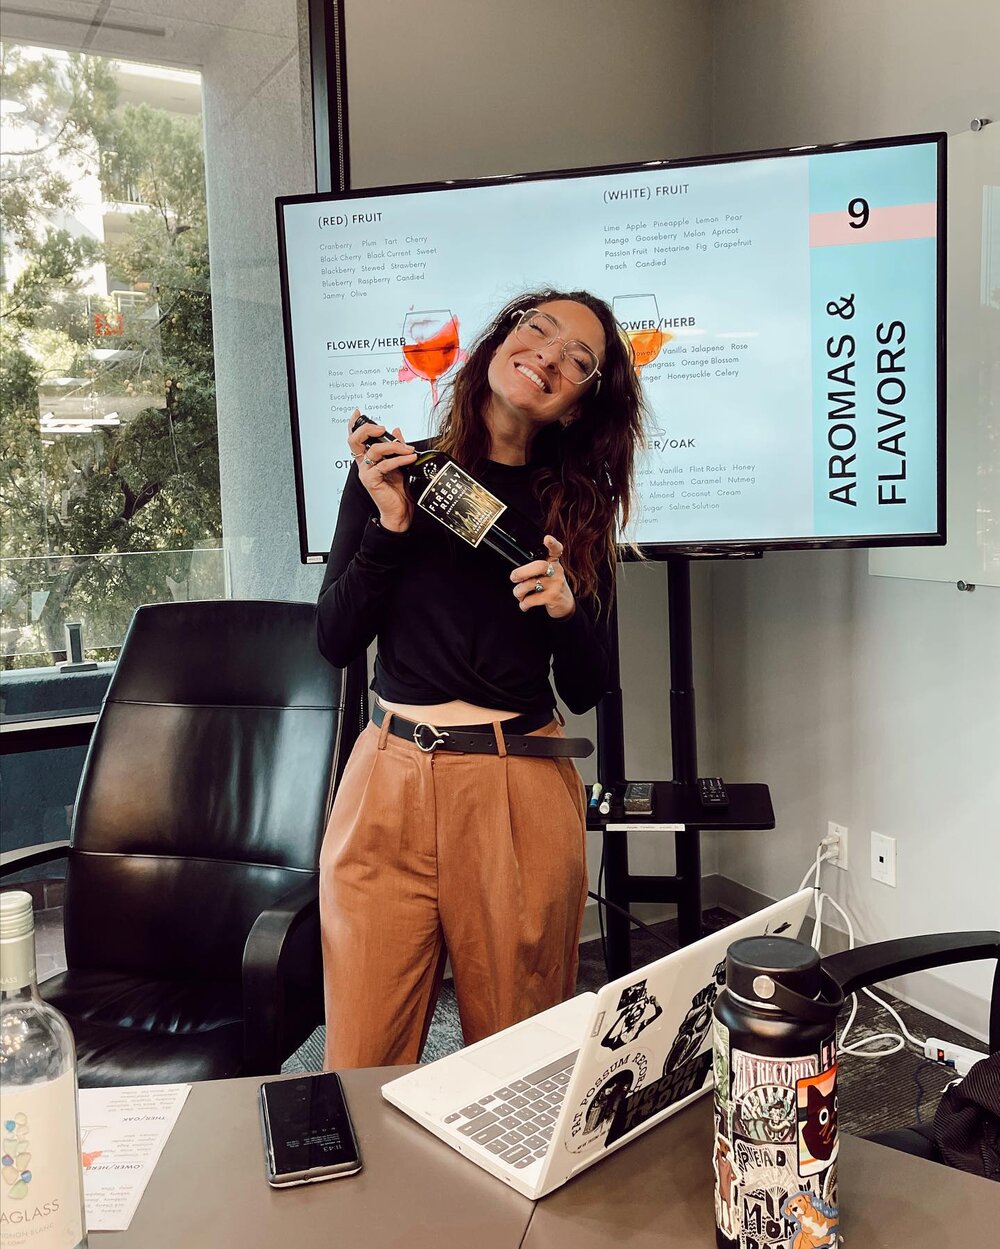 She does it all folks! Today our amazing People &amp; Culture Manager led a wine knowledge workshop for our team! Thanks for the education (and 11am wine), Zoe!